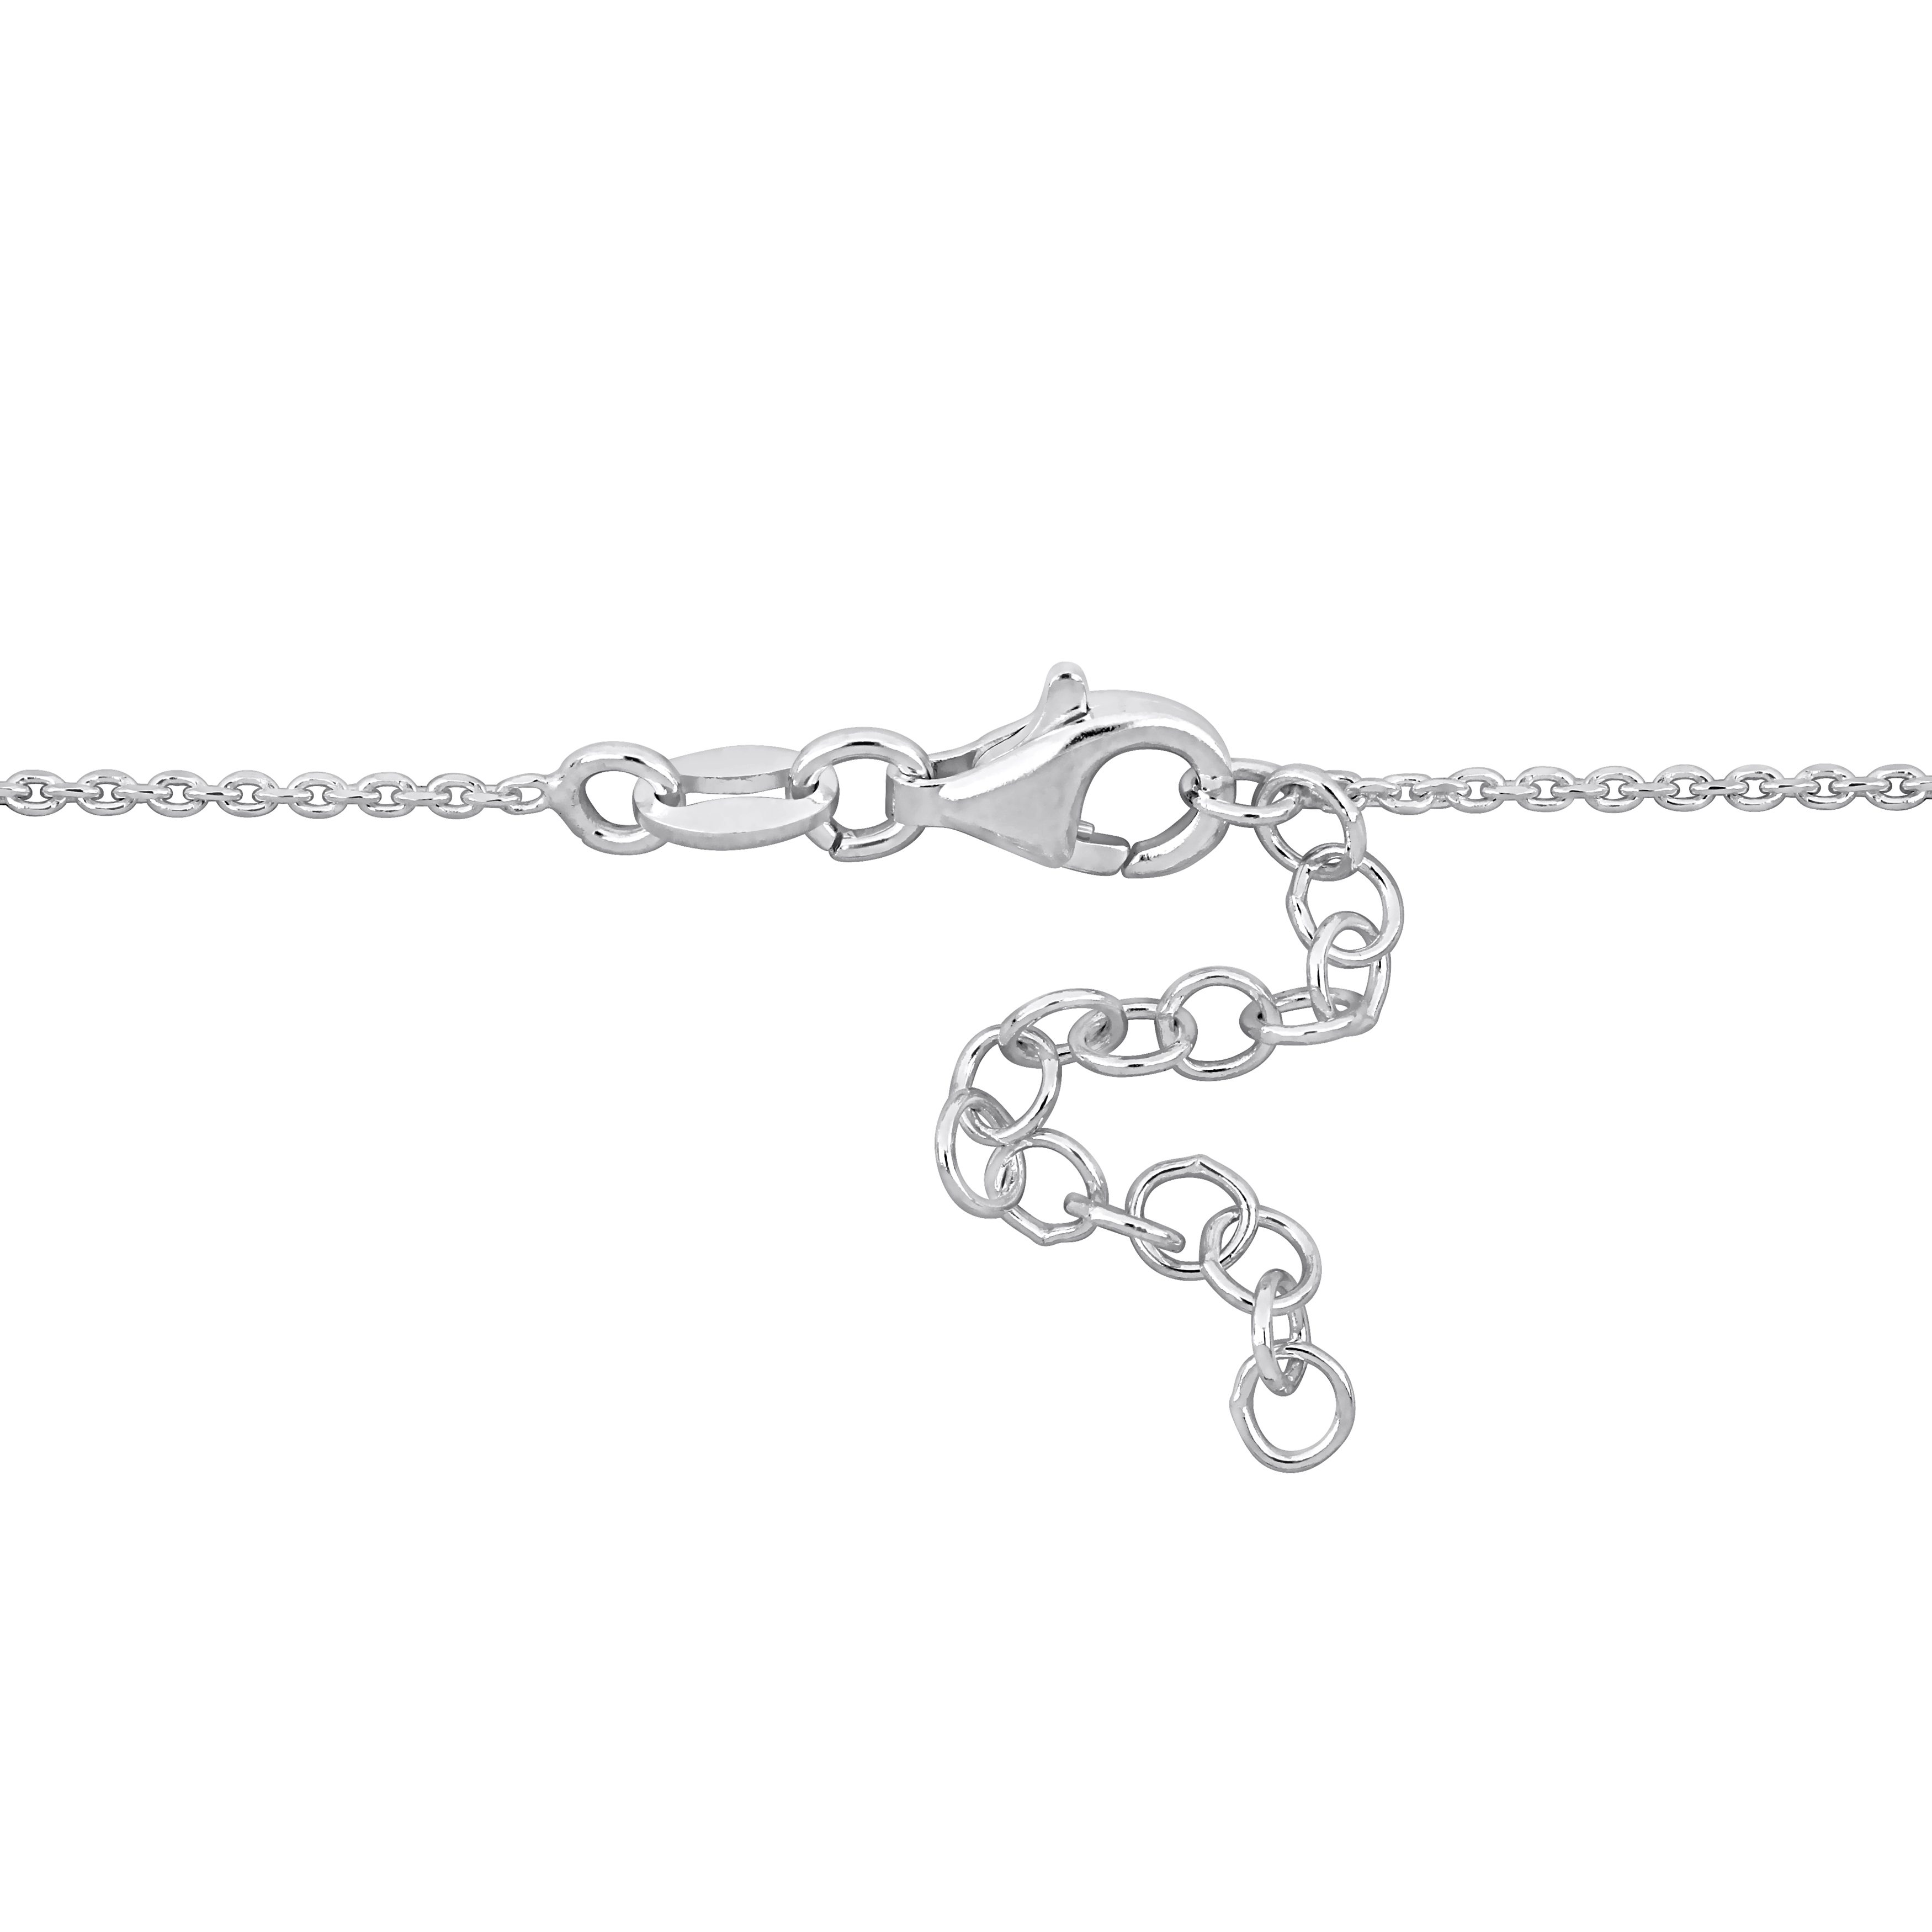 Double Rose Heart Charm Bracelet in Rose and Sterling Silver - 7+1 in.